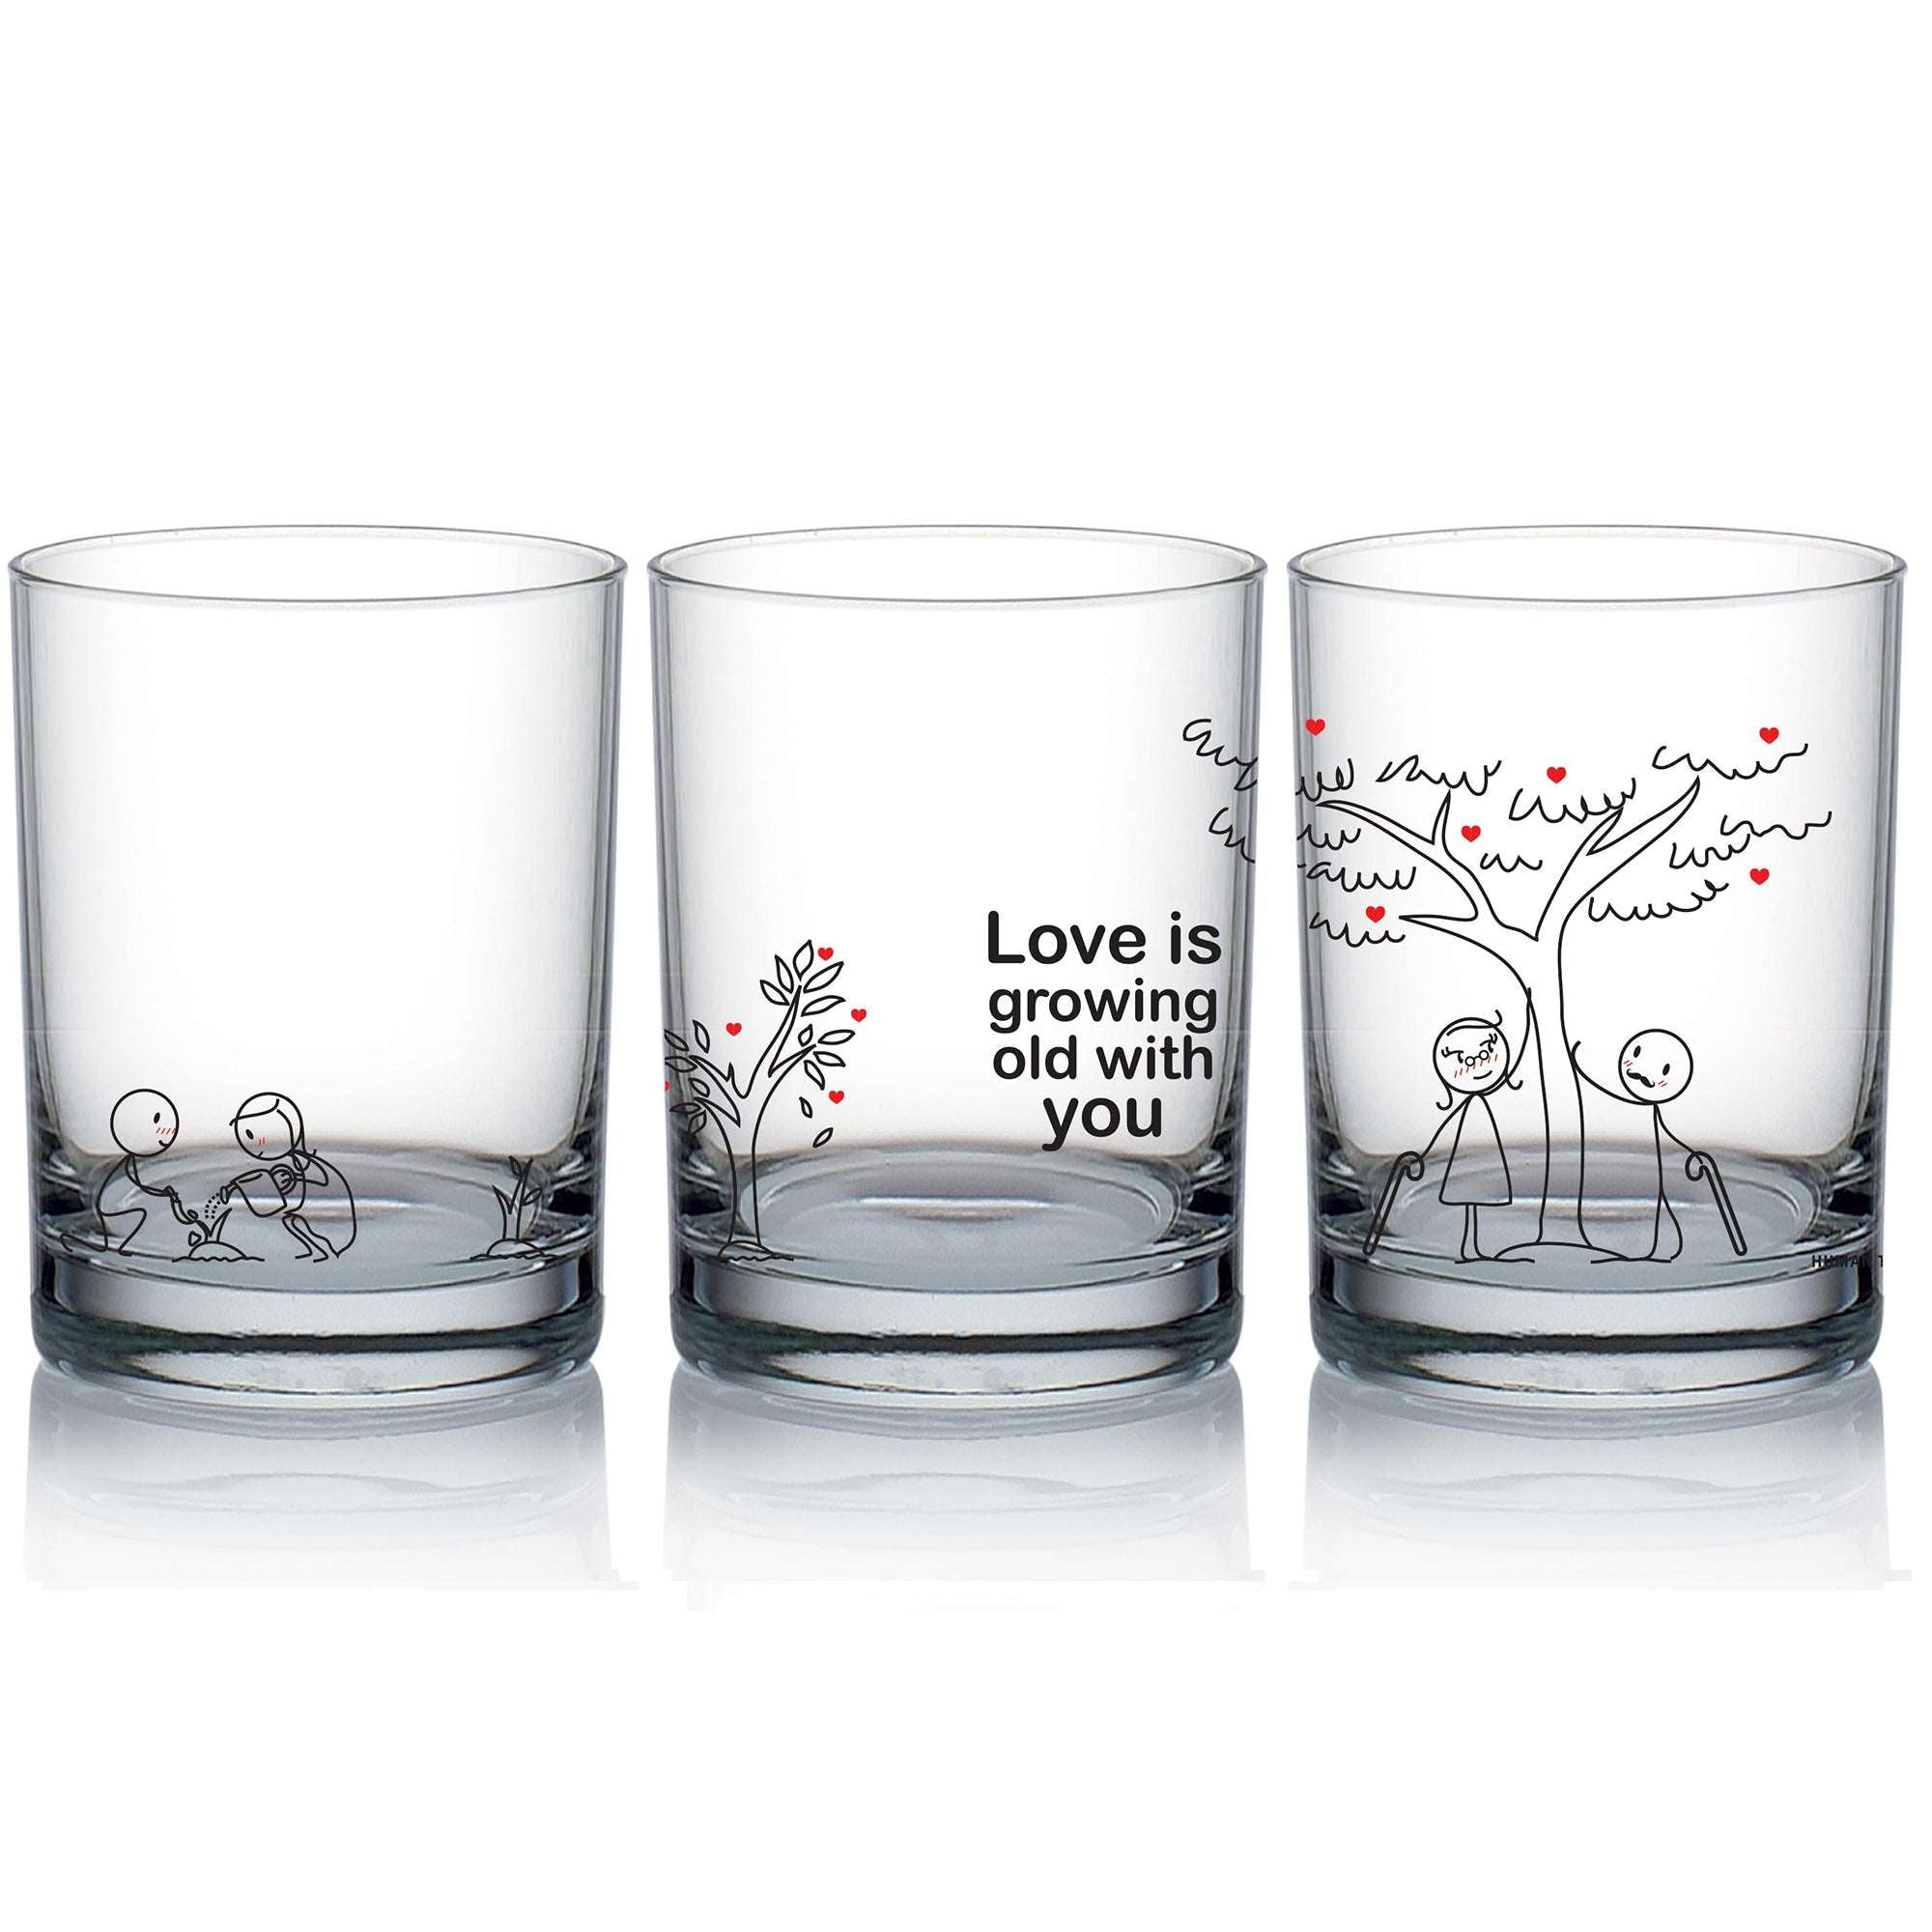 Celebrate love with a set of adorable glasses featuring artistic designs – a perfect gift for a couples anniversary or for him and her!